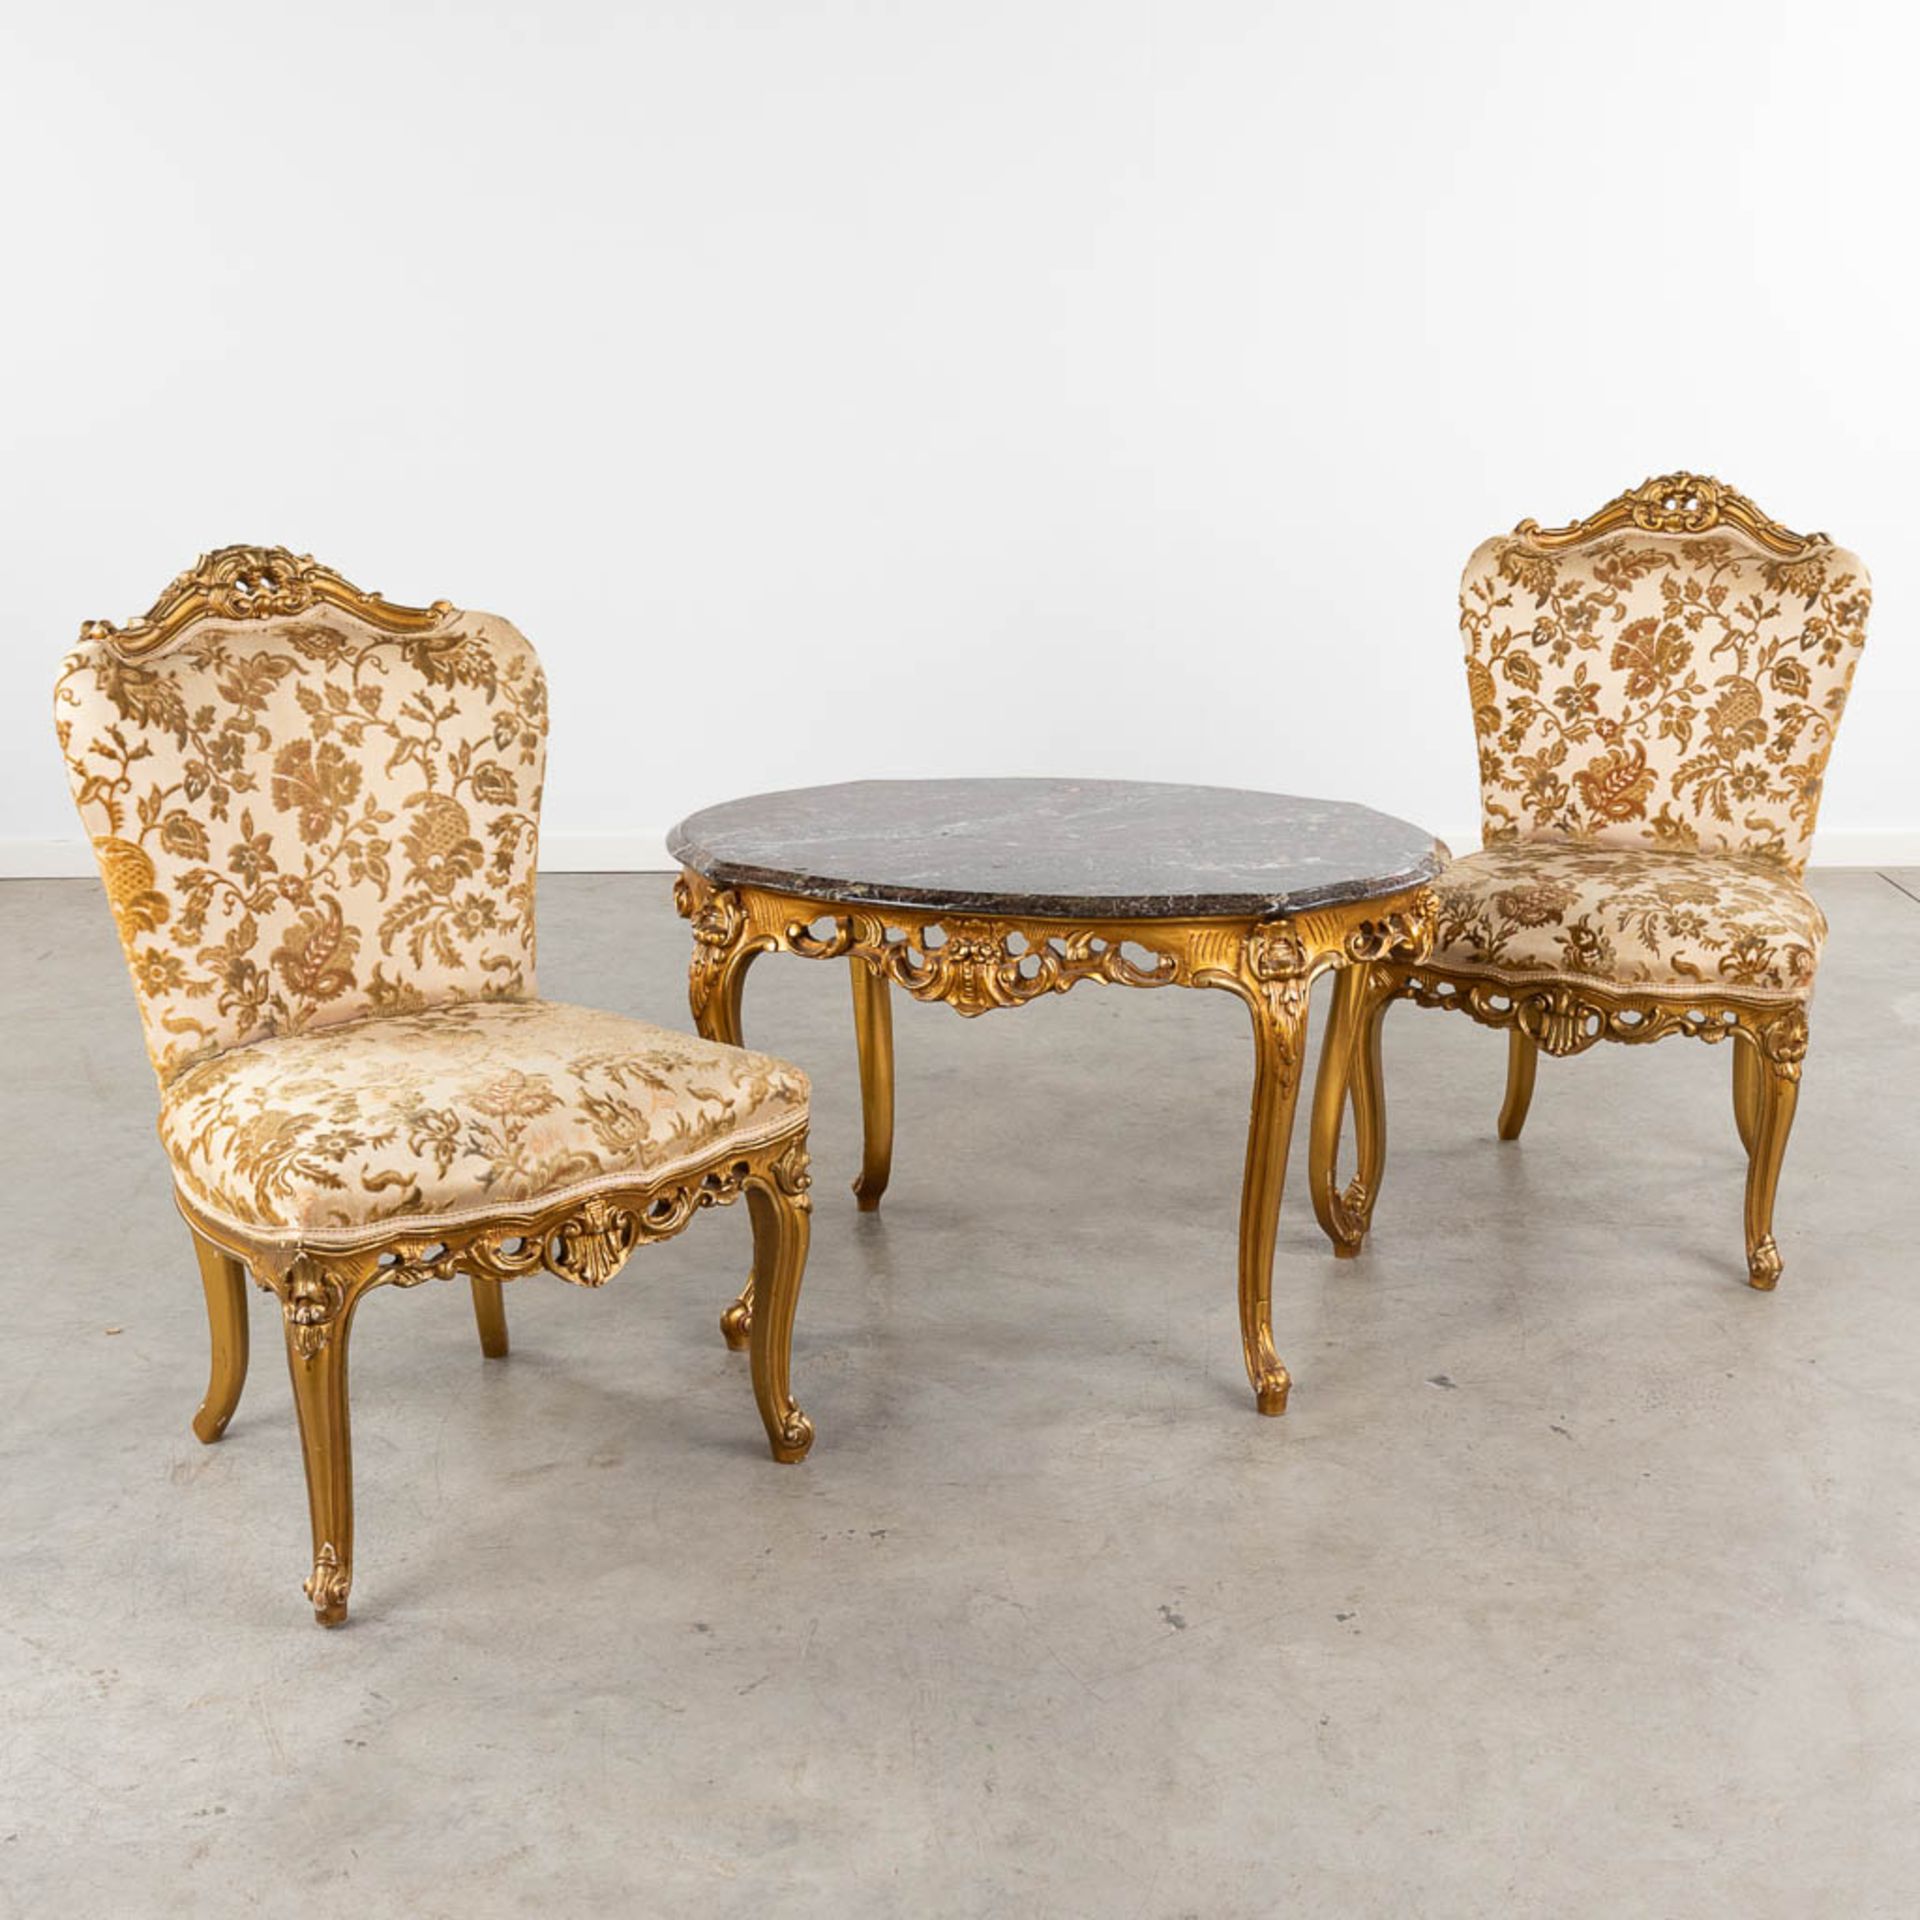 A coffee table, two matching chairs, sculptured wood in Louis XV style. (L:65 x W:85 x H:54 cm)